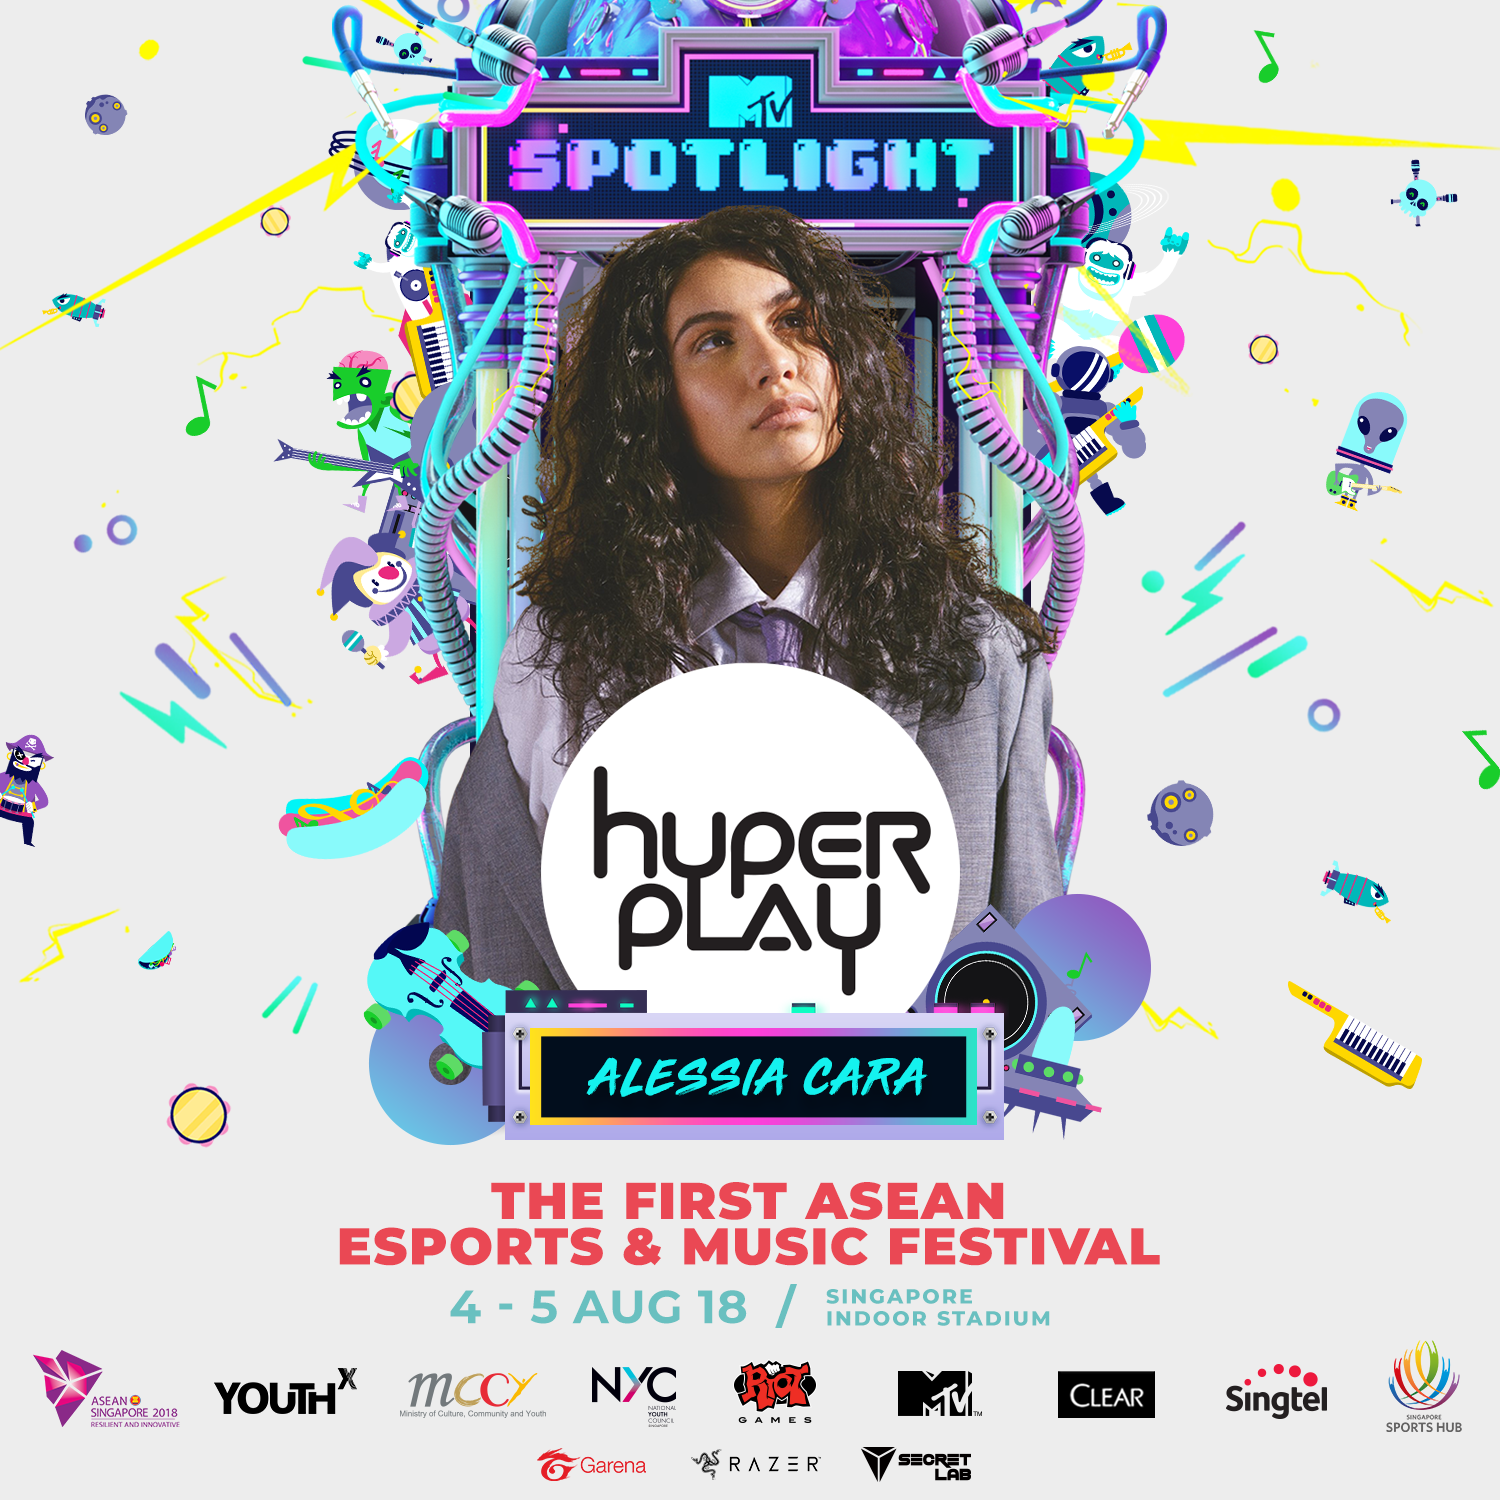 job lever Lionel Green Street Grammy Award Winner Alessia Cara Completes the Stella Performers' Line-Up  for MTV Spotlight at Hyperplay